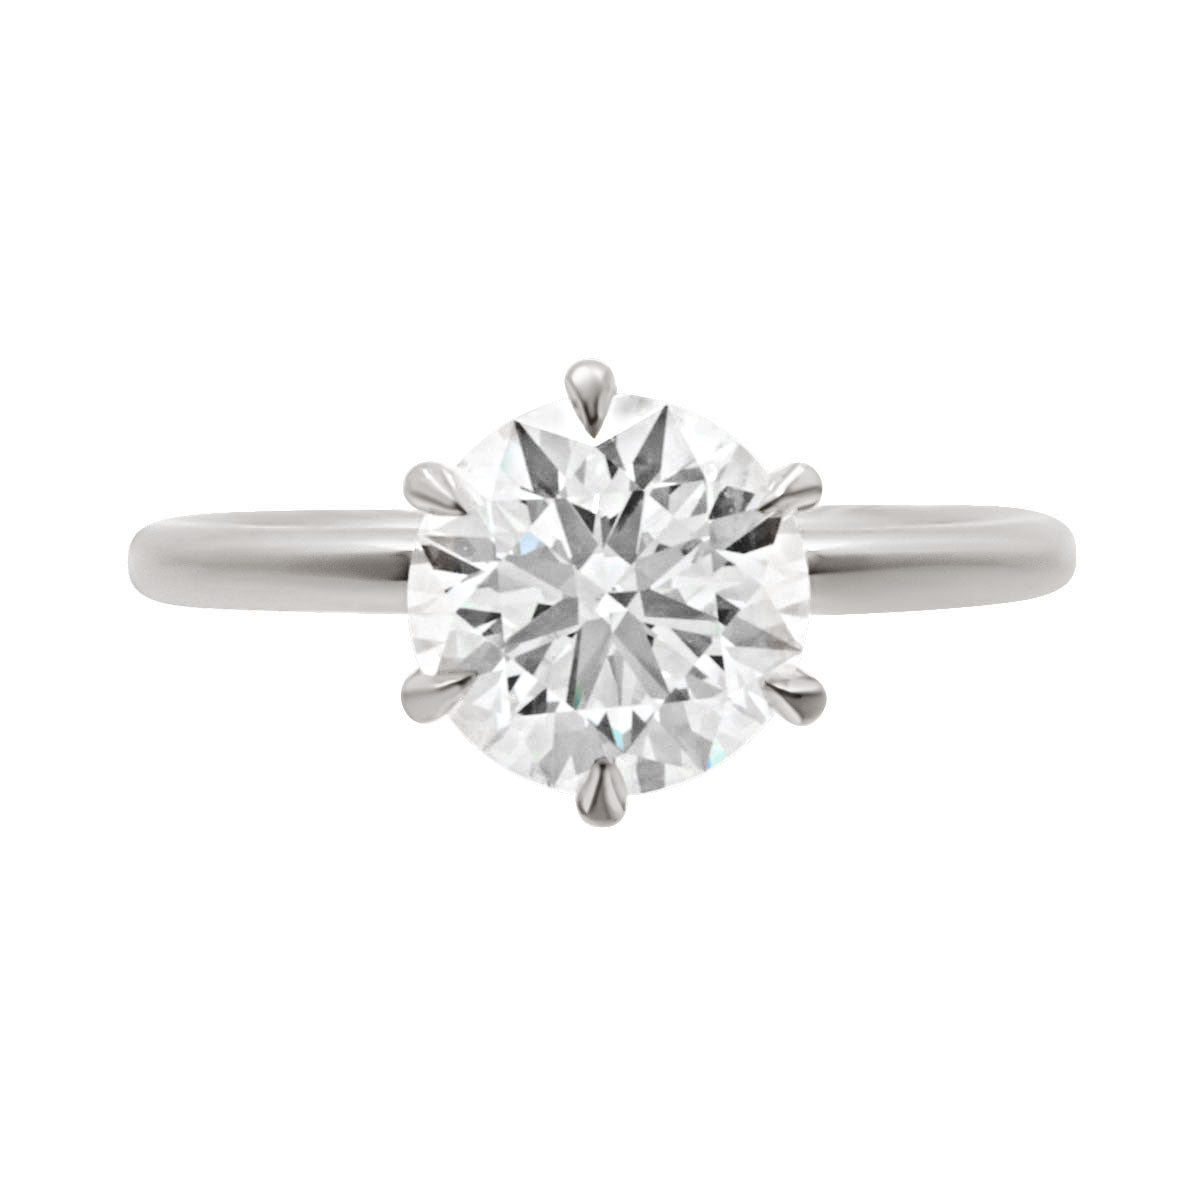 Talon Claw Solitaire ring in white gold